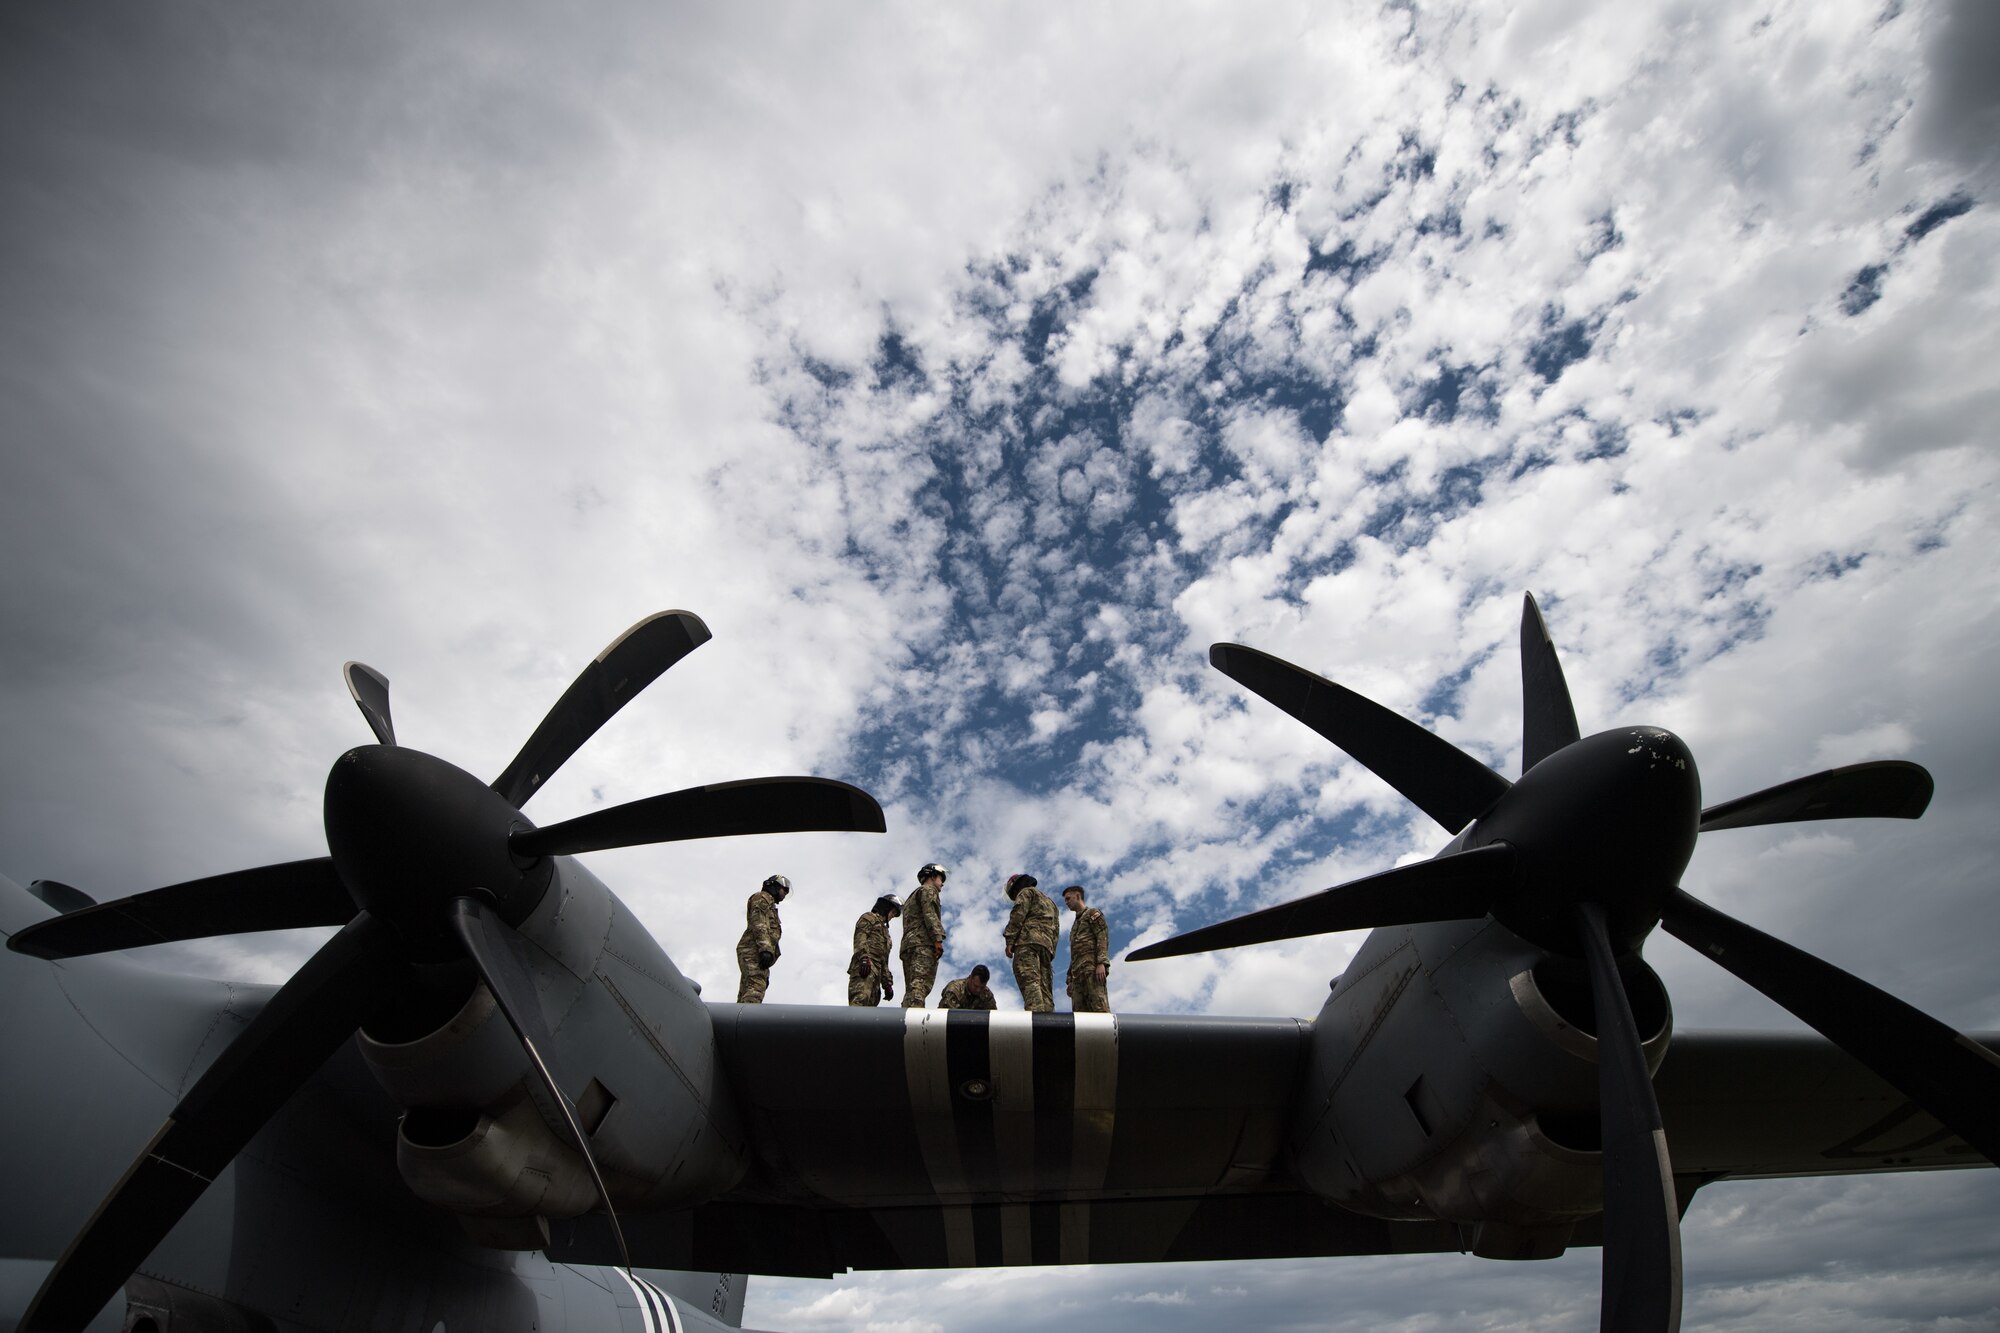 Photo of Airmen standing on aircraft wing